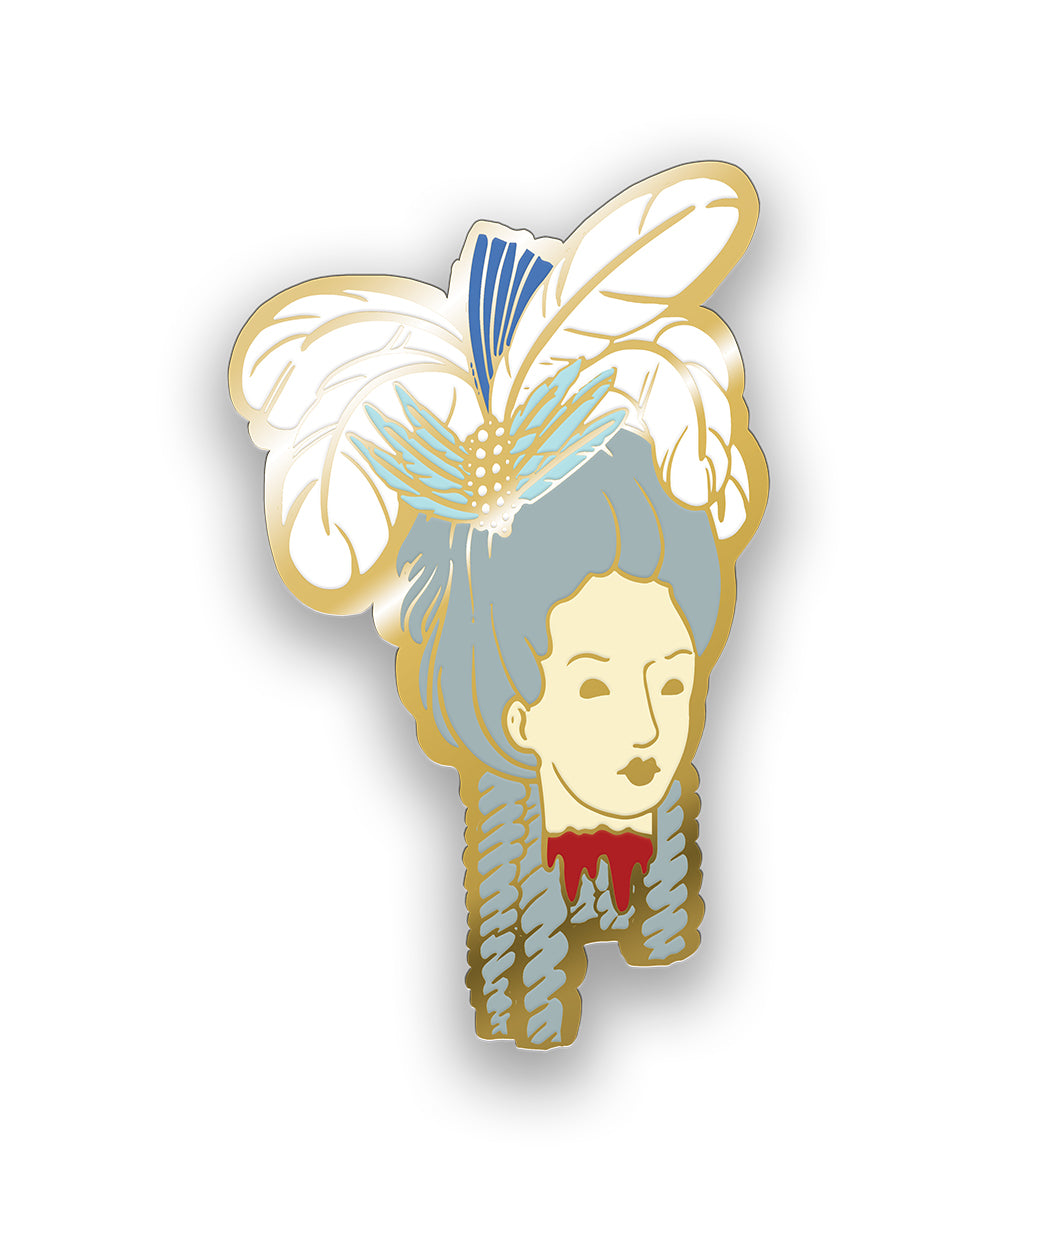 A Noble Blood pin of Marie Antoinette's head adorned with feathers with a bloody neck.